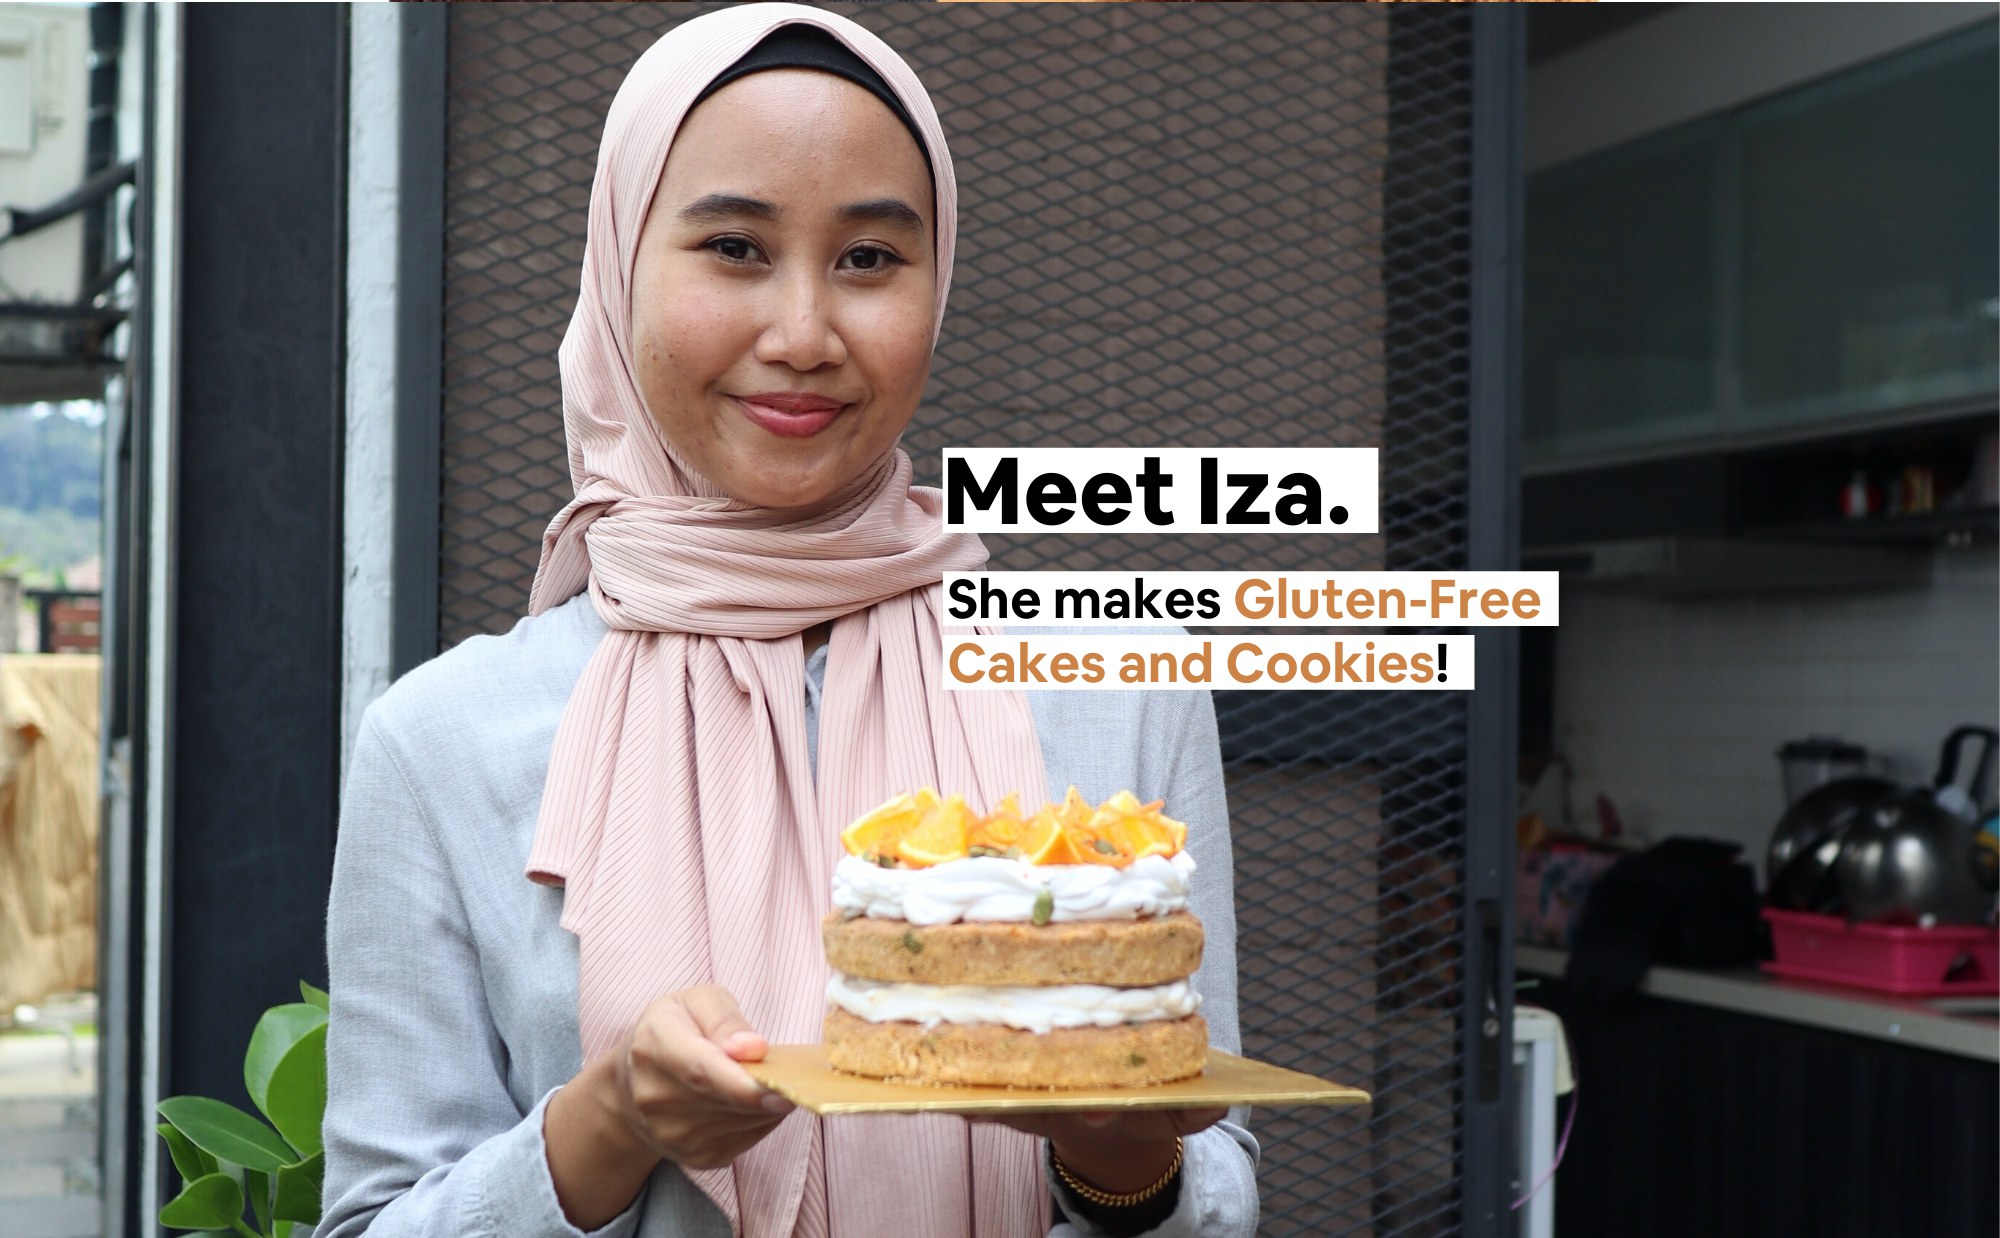 Meet our homechef - Iza. She makes Gluten-Free Cakes and Cookies.